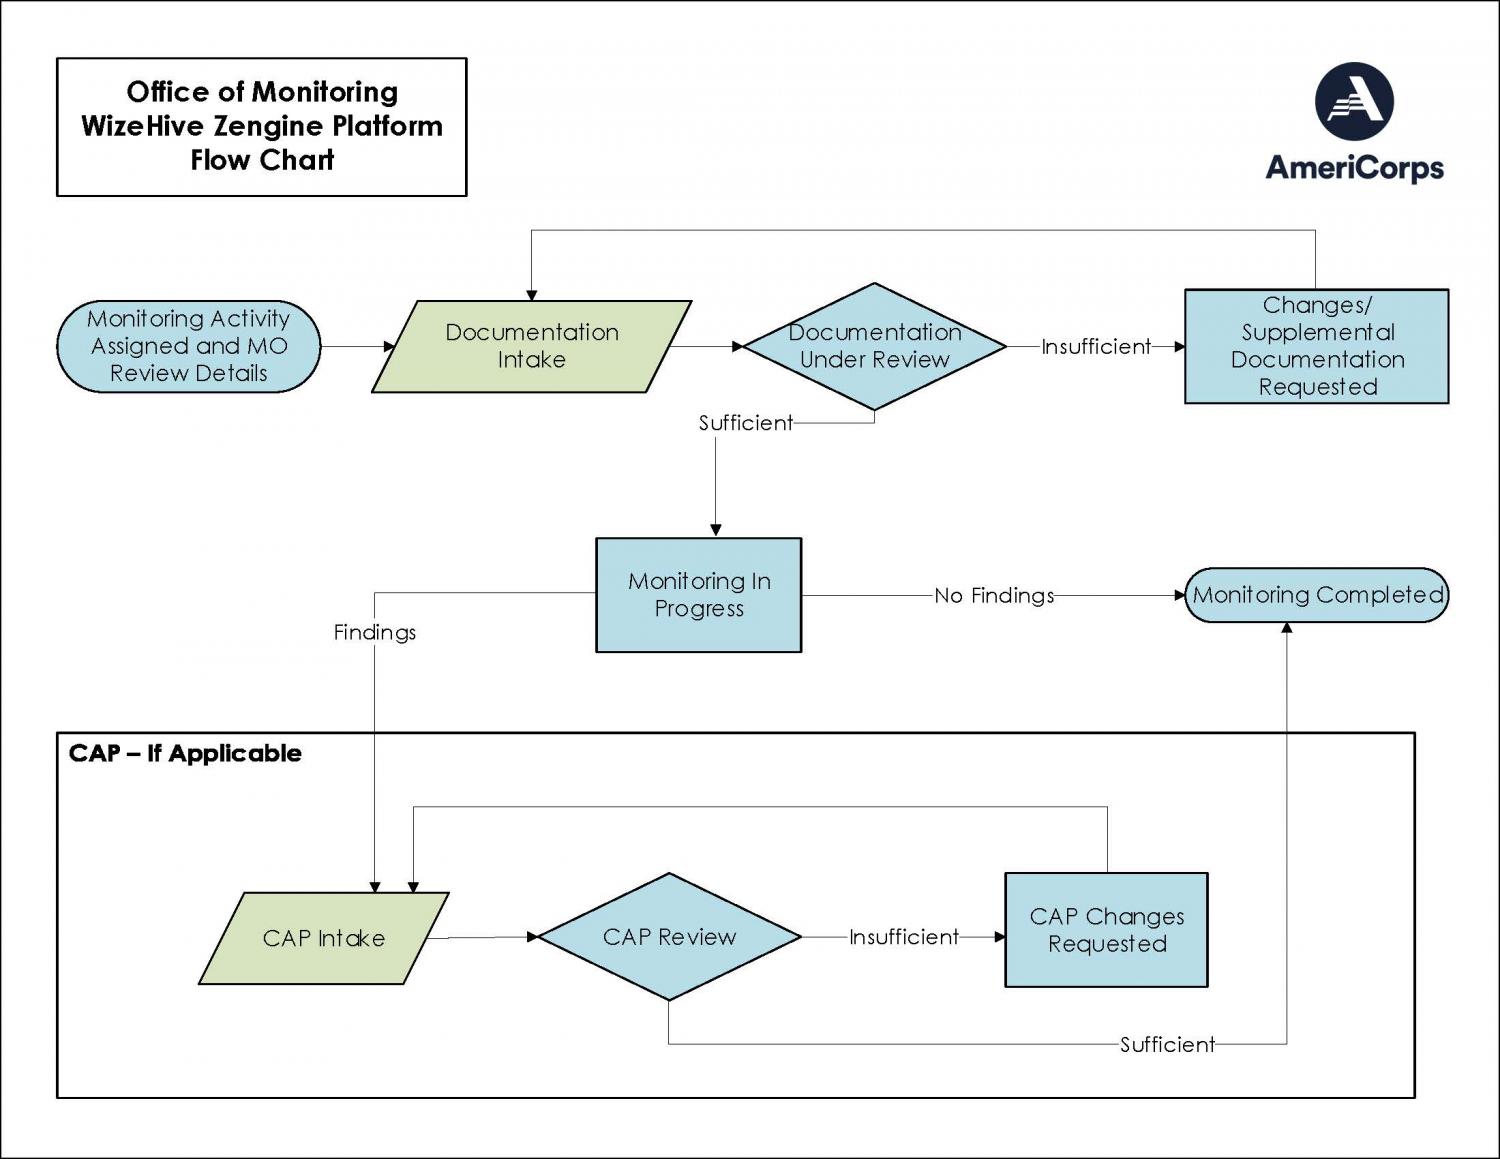 Office of Monitoring flow chart for WizeHive